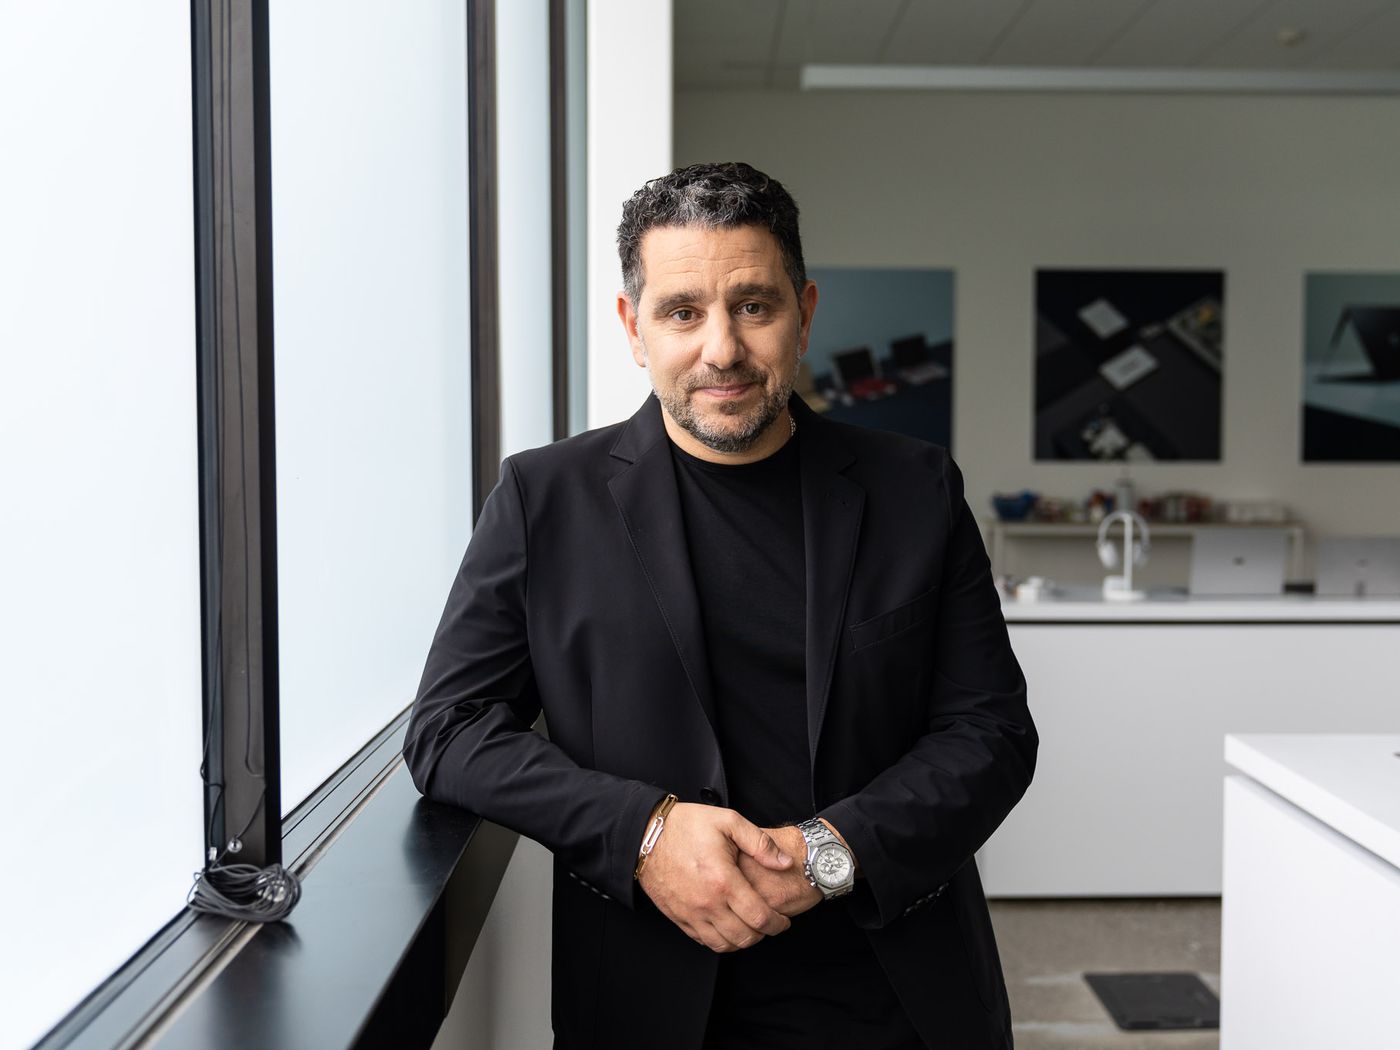 Microsoft’s Chief Product Officer, Panos Panay, Departs After Nearly 20 Years